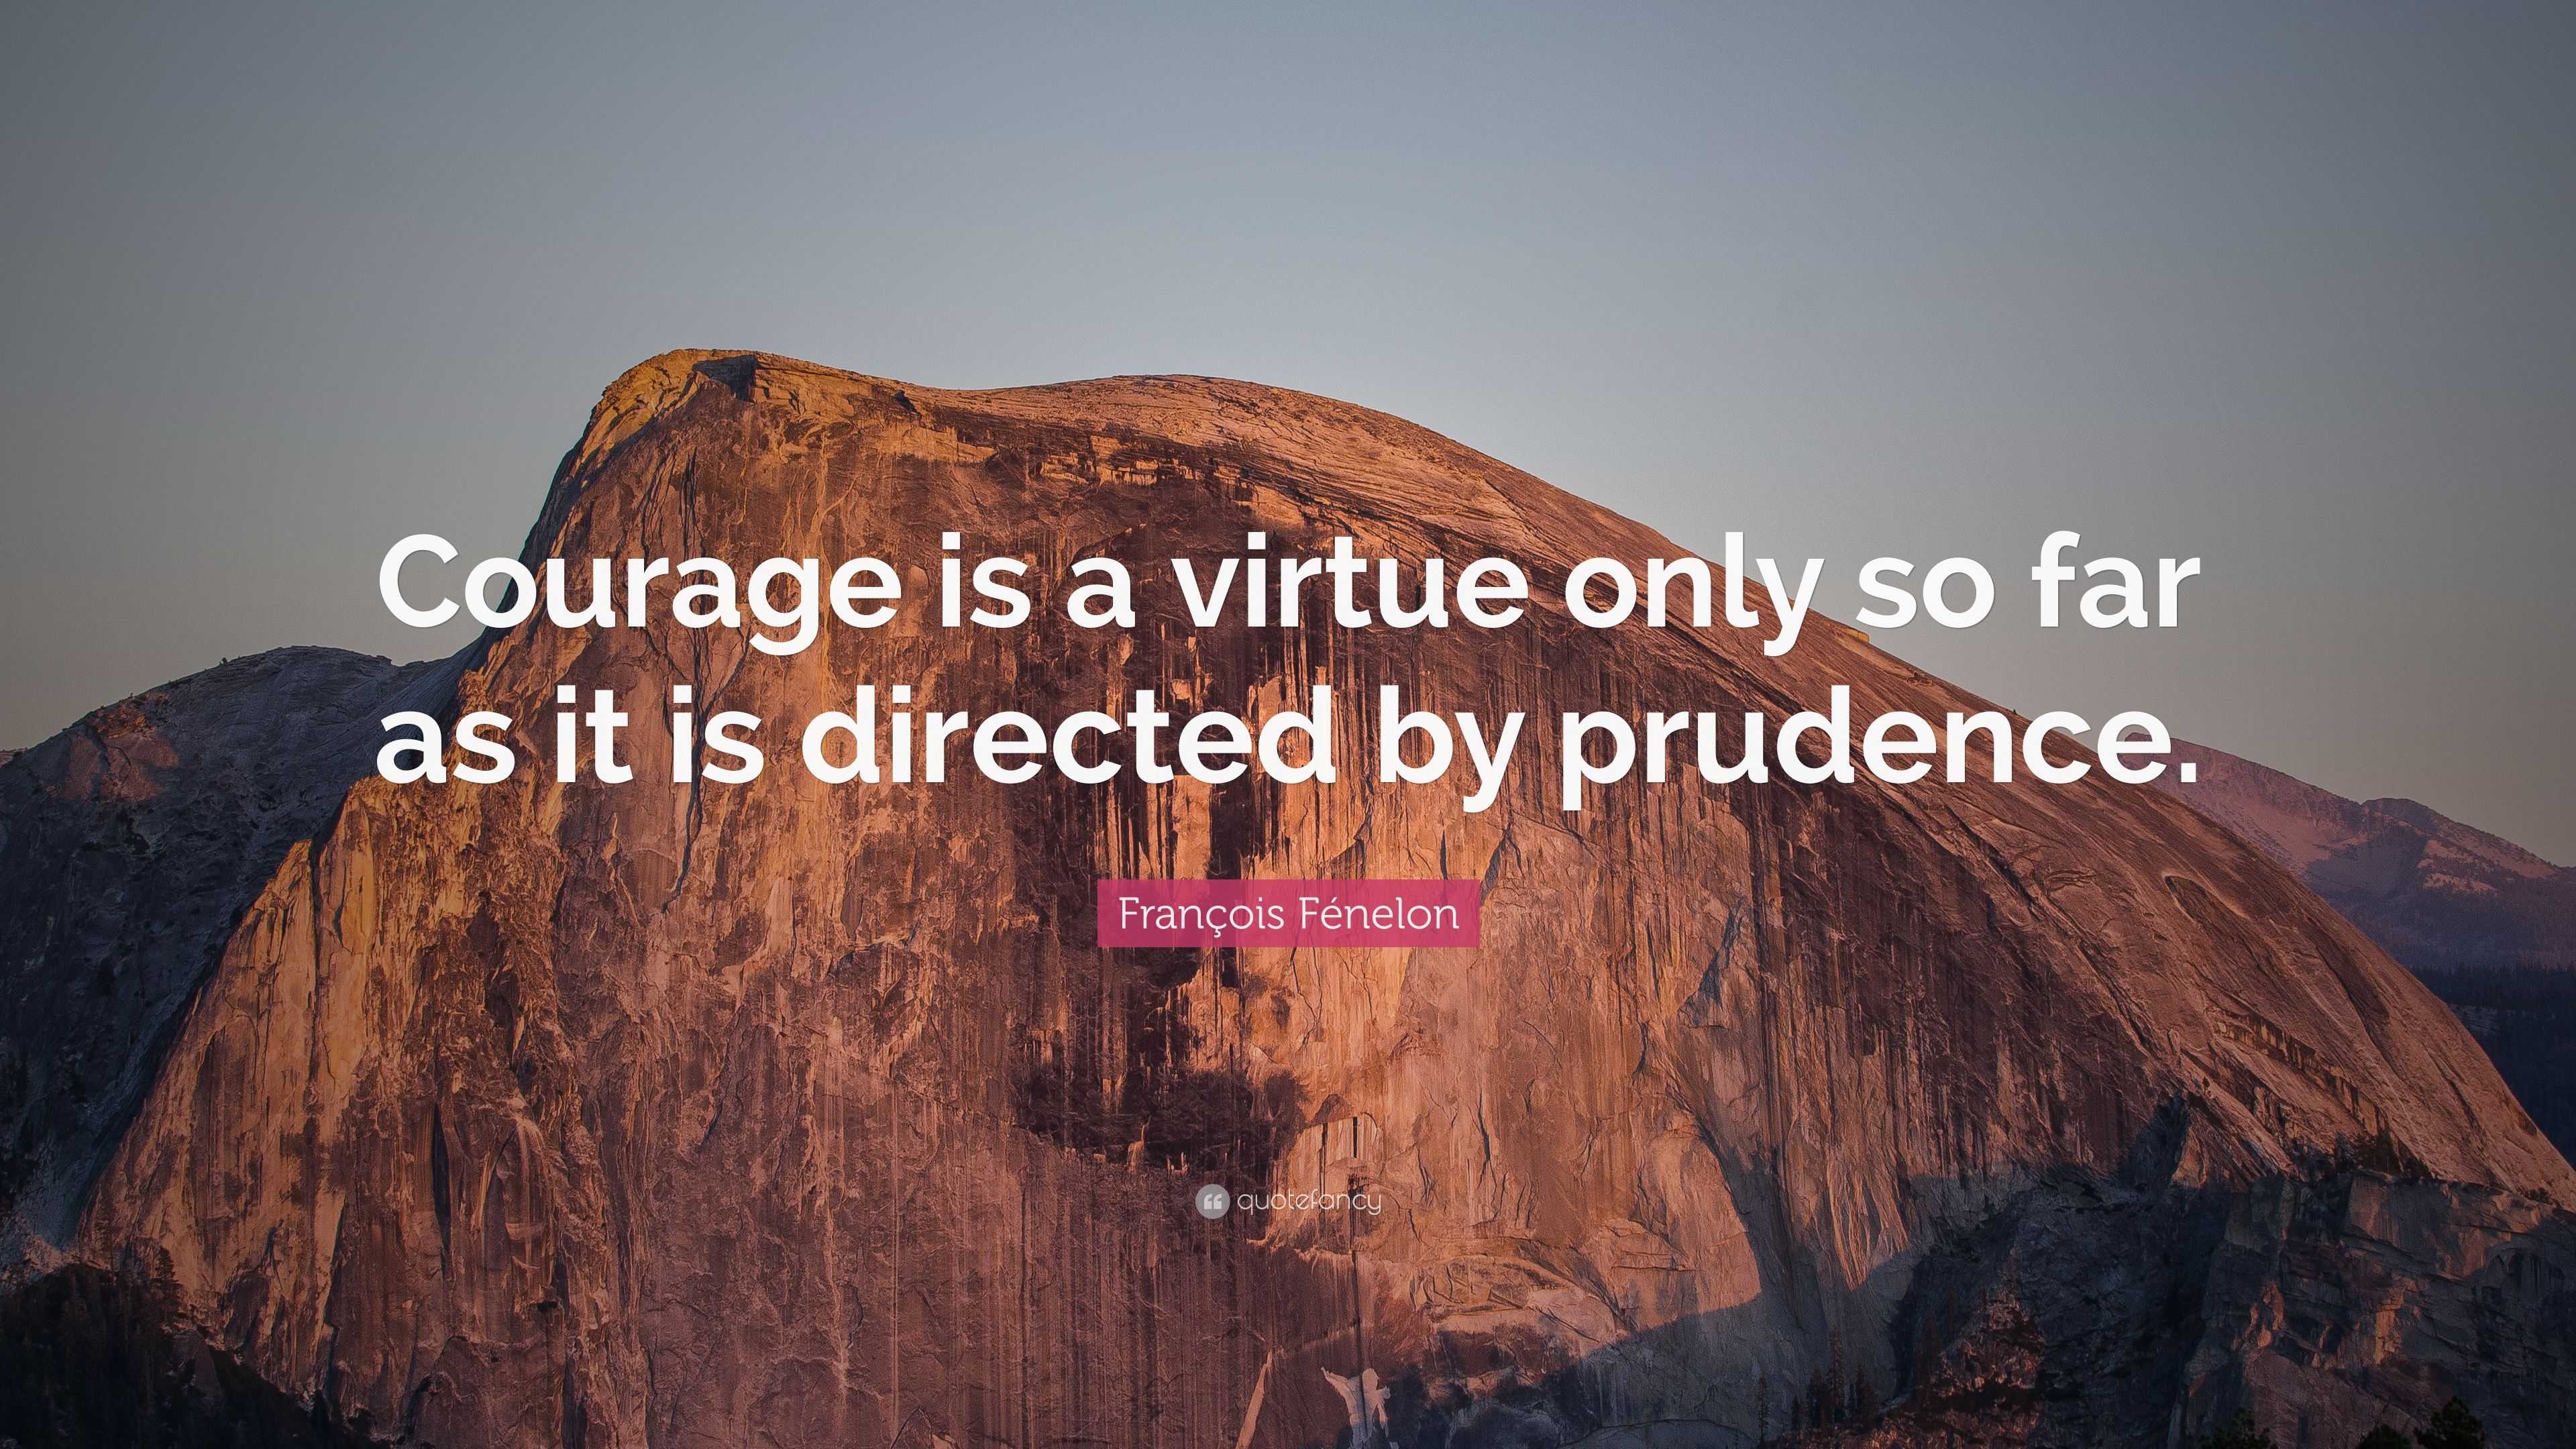 François Fénelon Quote: “Courage is a virtue only so far as it is ...